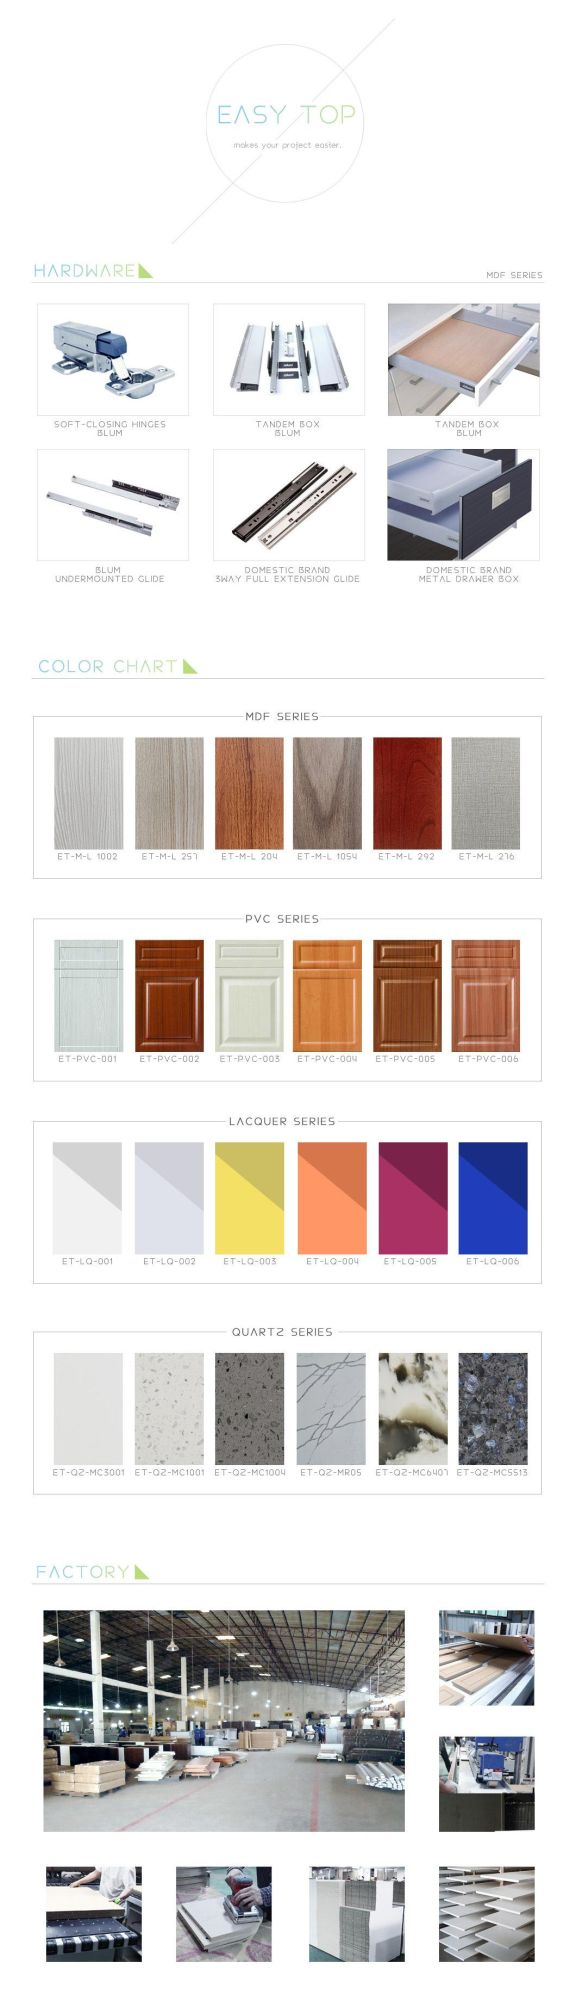 Modern Design MDF High Gloss White and Brown Lacquer Finish Modular Kitchen Cabinet